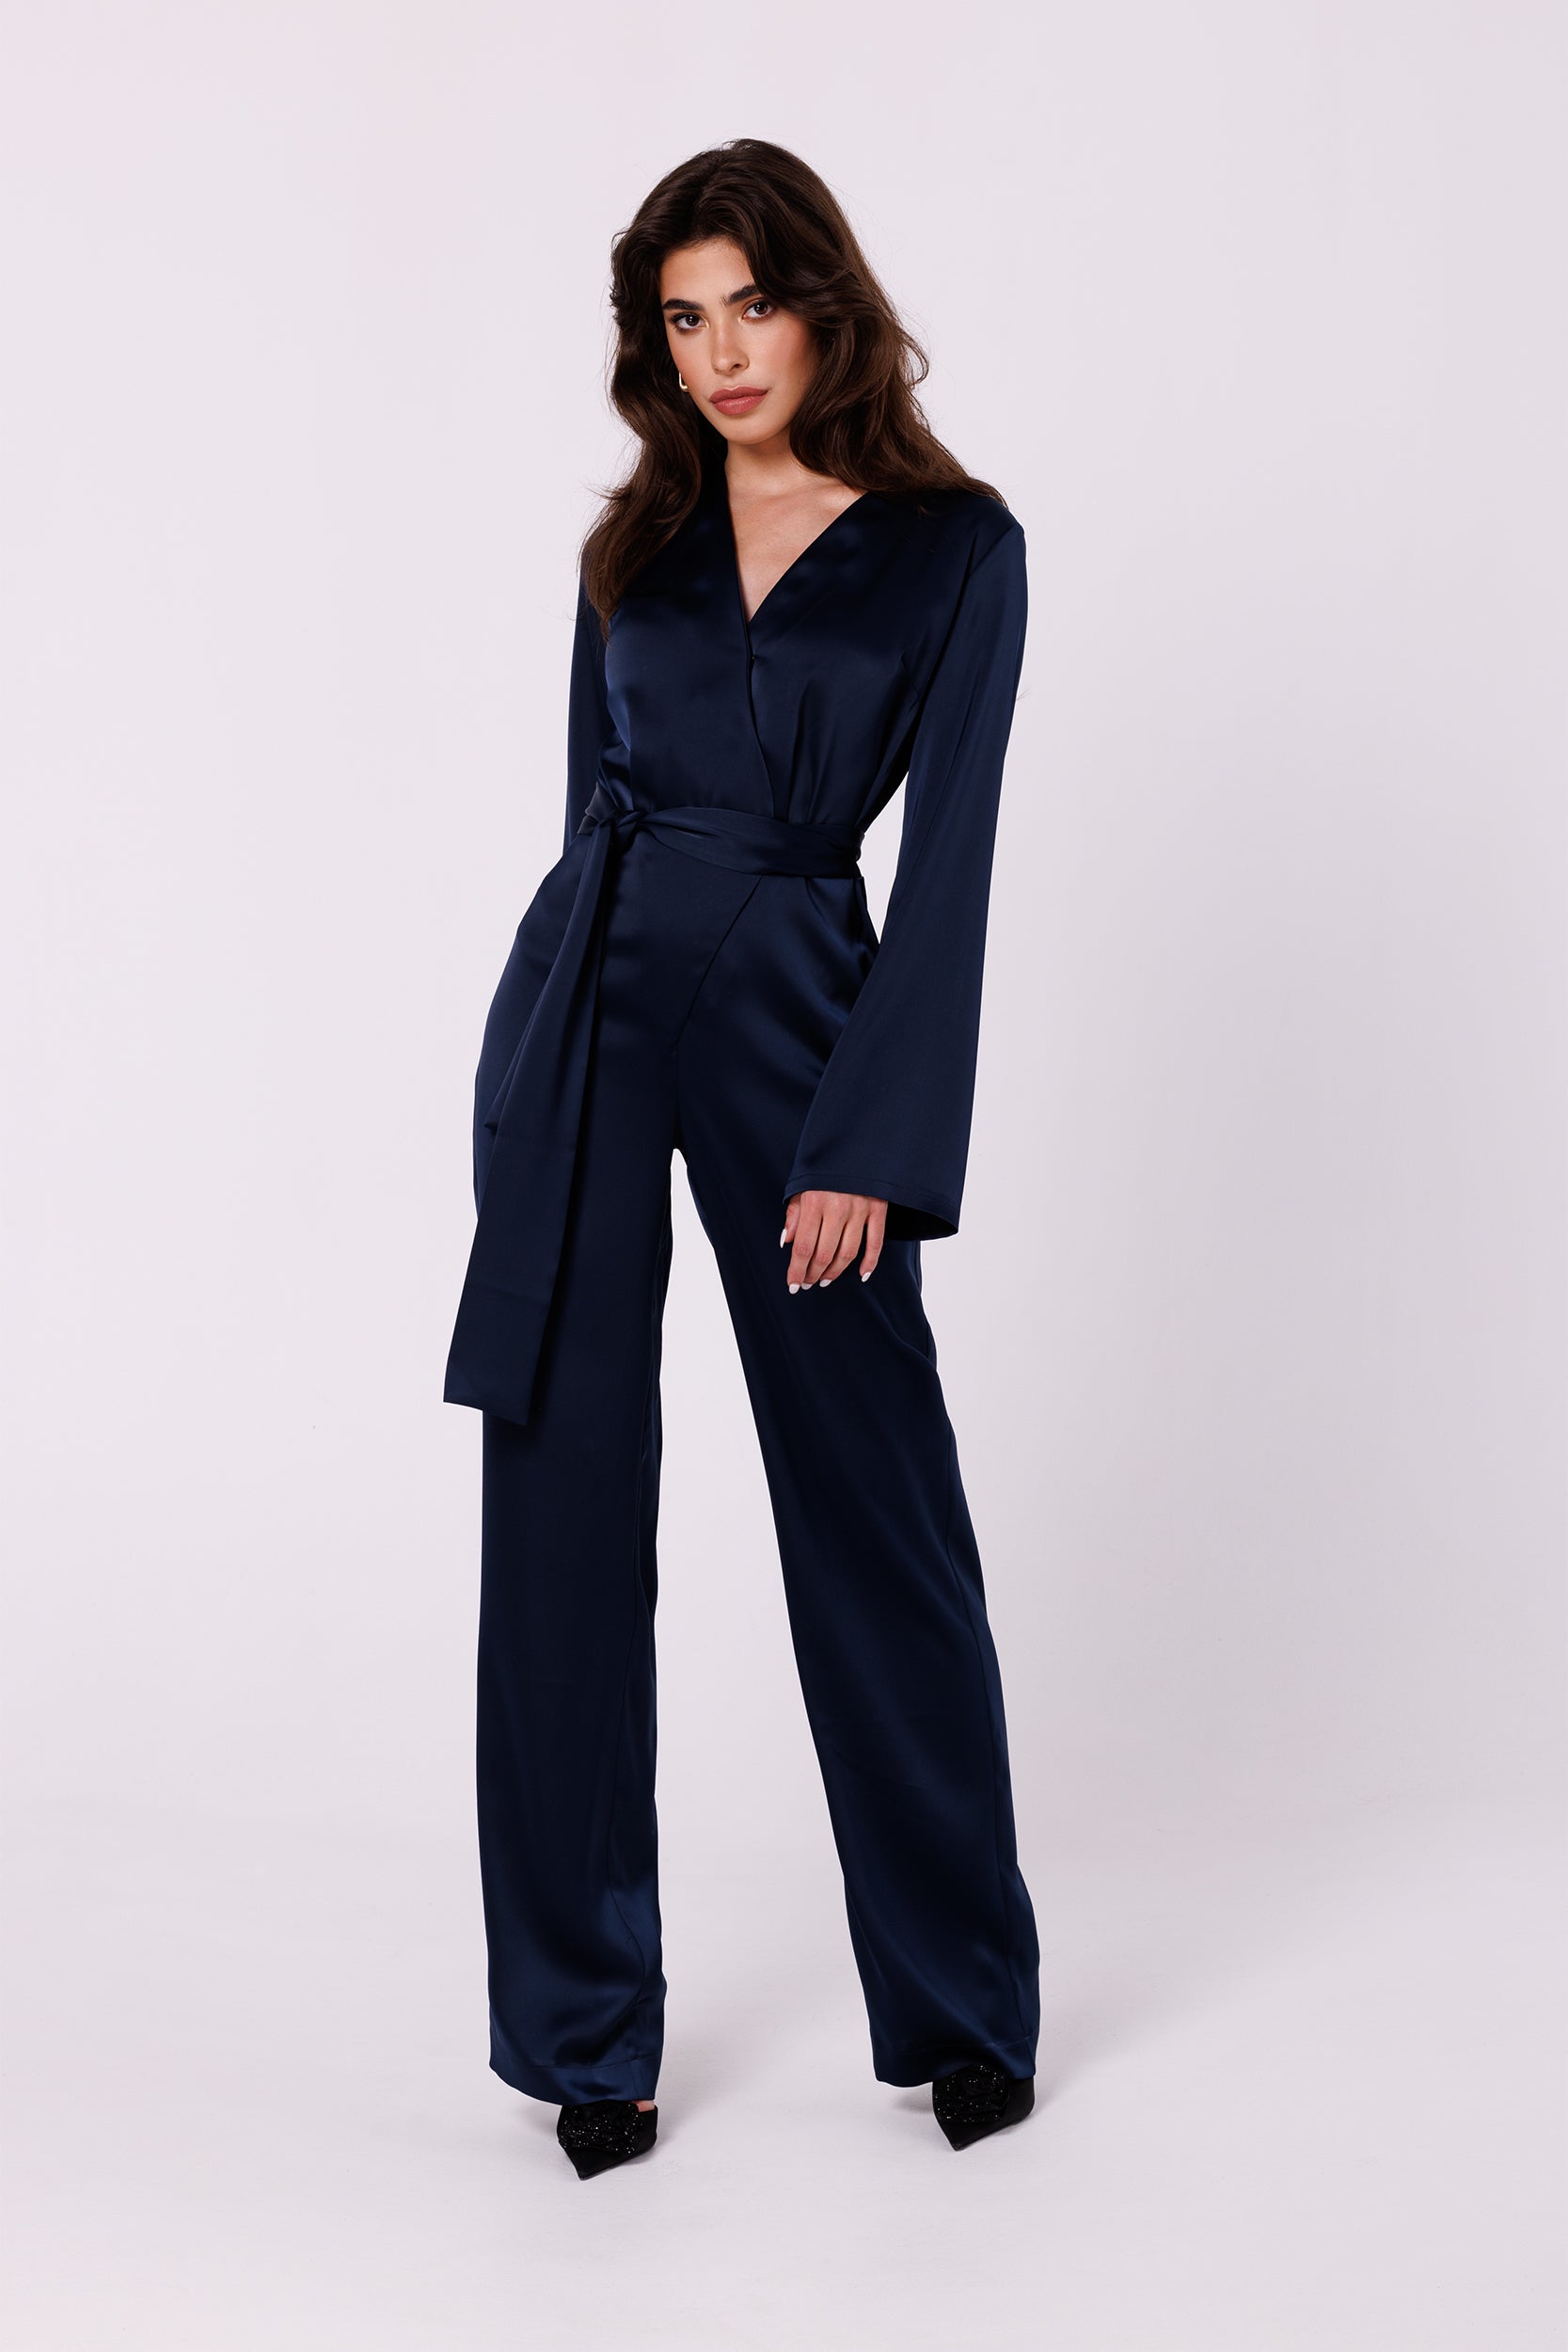 Long Sleeve Night Blue Satin Jumpsuit | Strictly In | Make a statement at your next event with our Long Sleeve Satin Jumpsuit. Crafted from luxurious satin, it features a V-neck, long sleeves, and a tied waist for a glamorous yet comfortable look. Perfect for the party season.